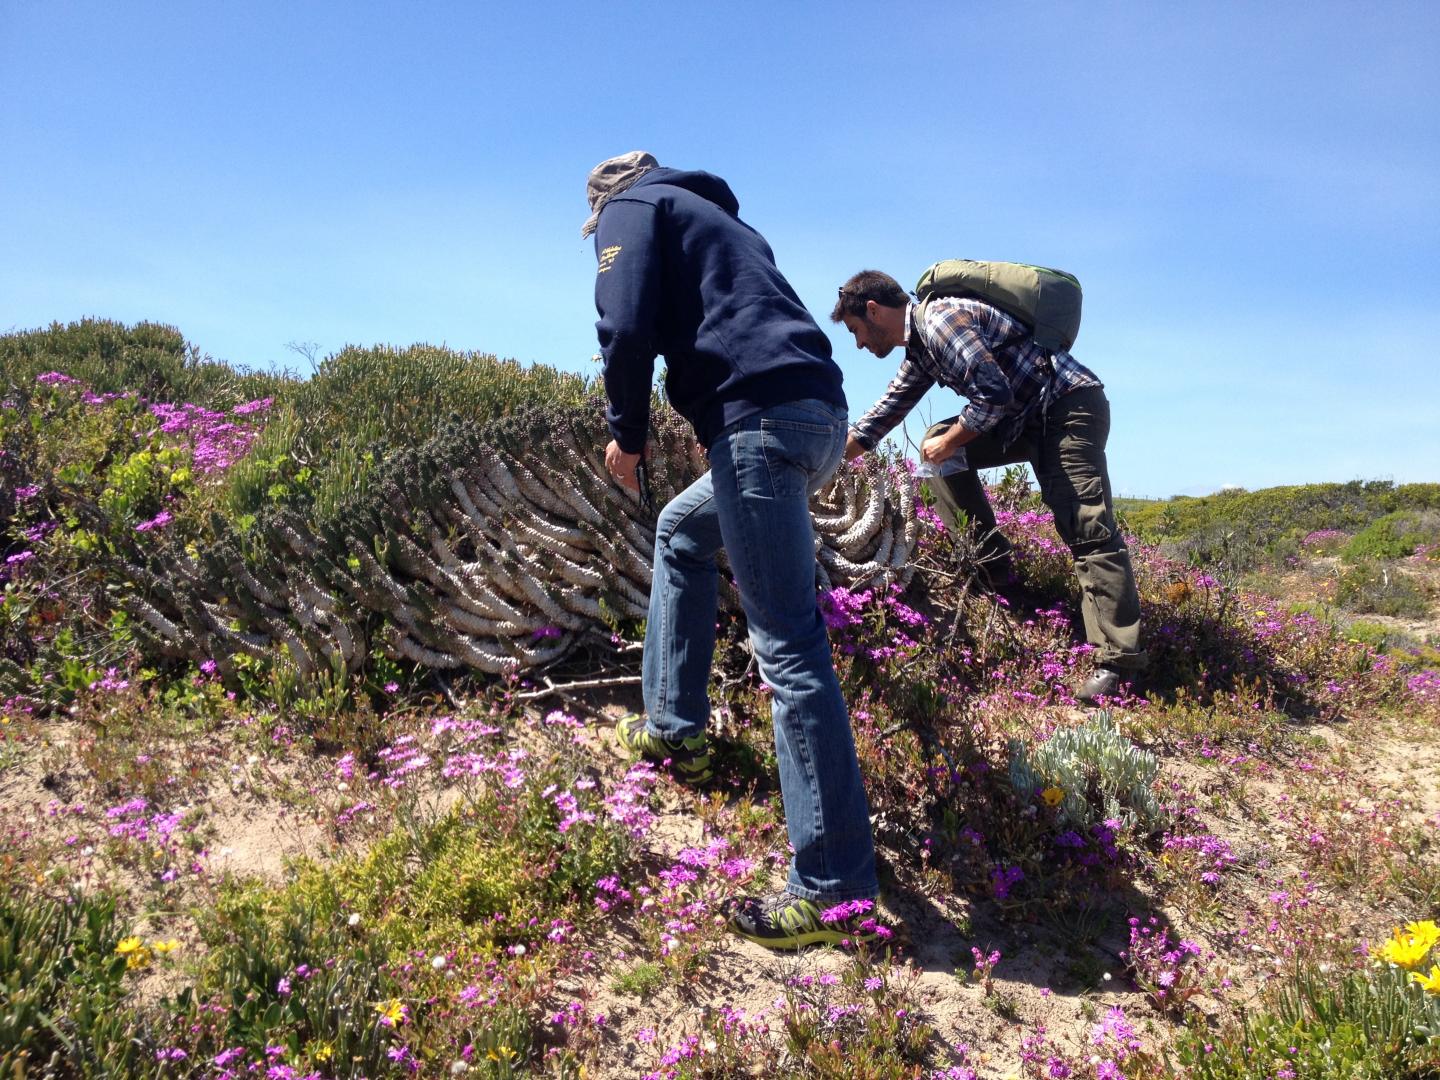 Prospecting in Floristic Areas From the Western Cape